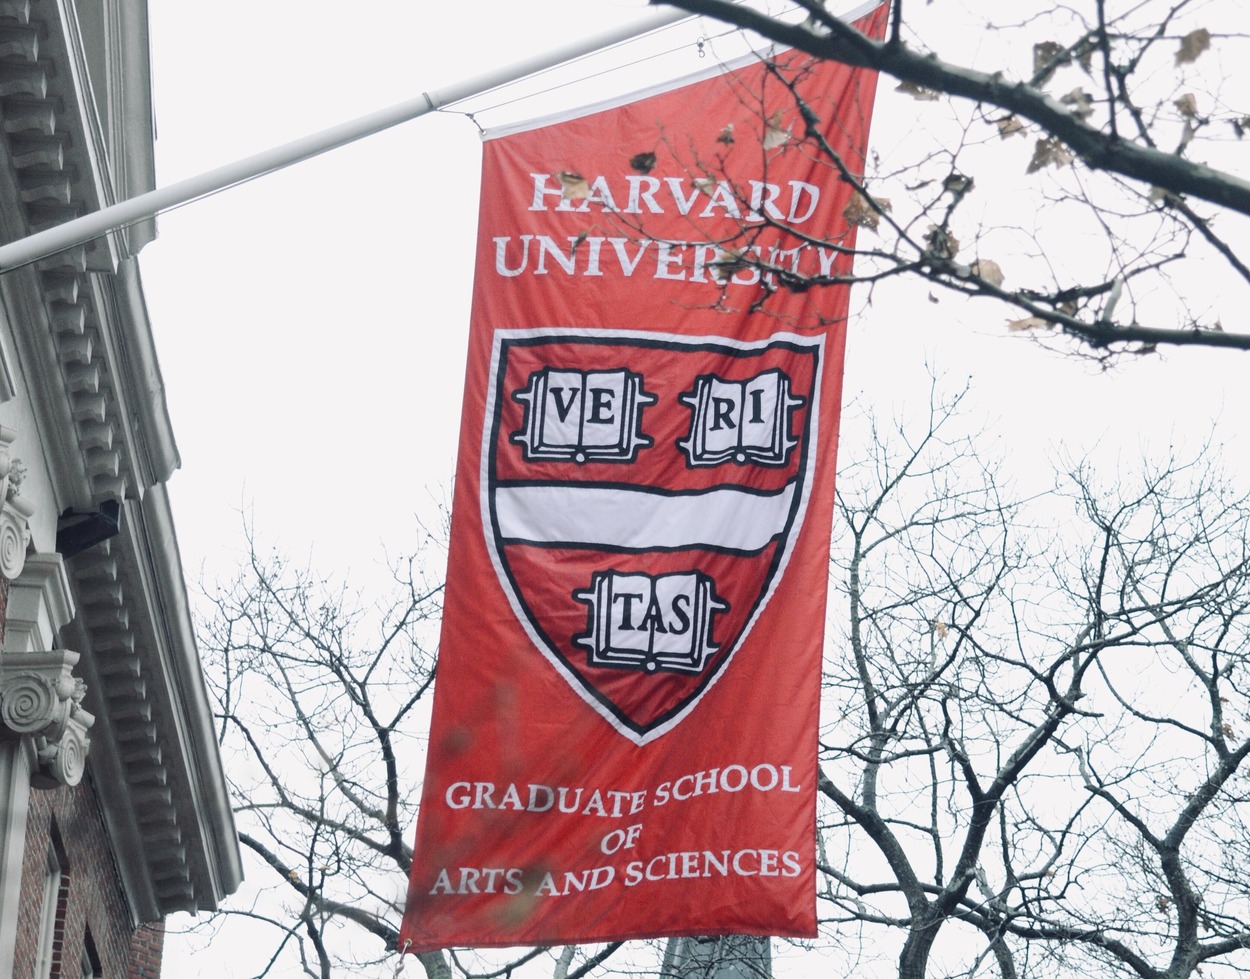 How to prepare for Harvard?